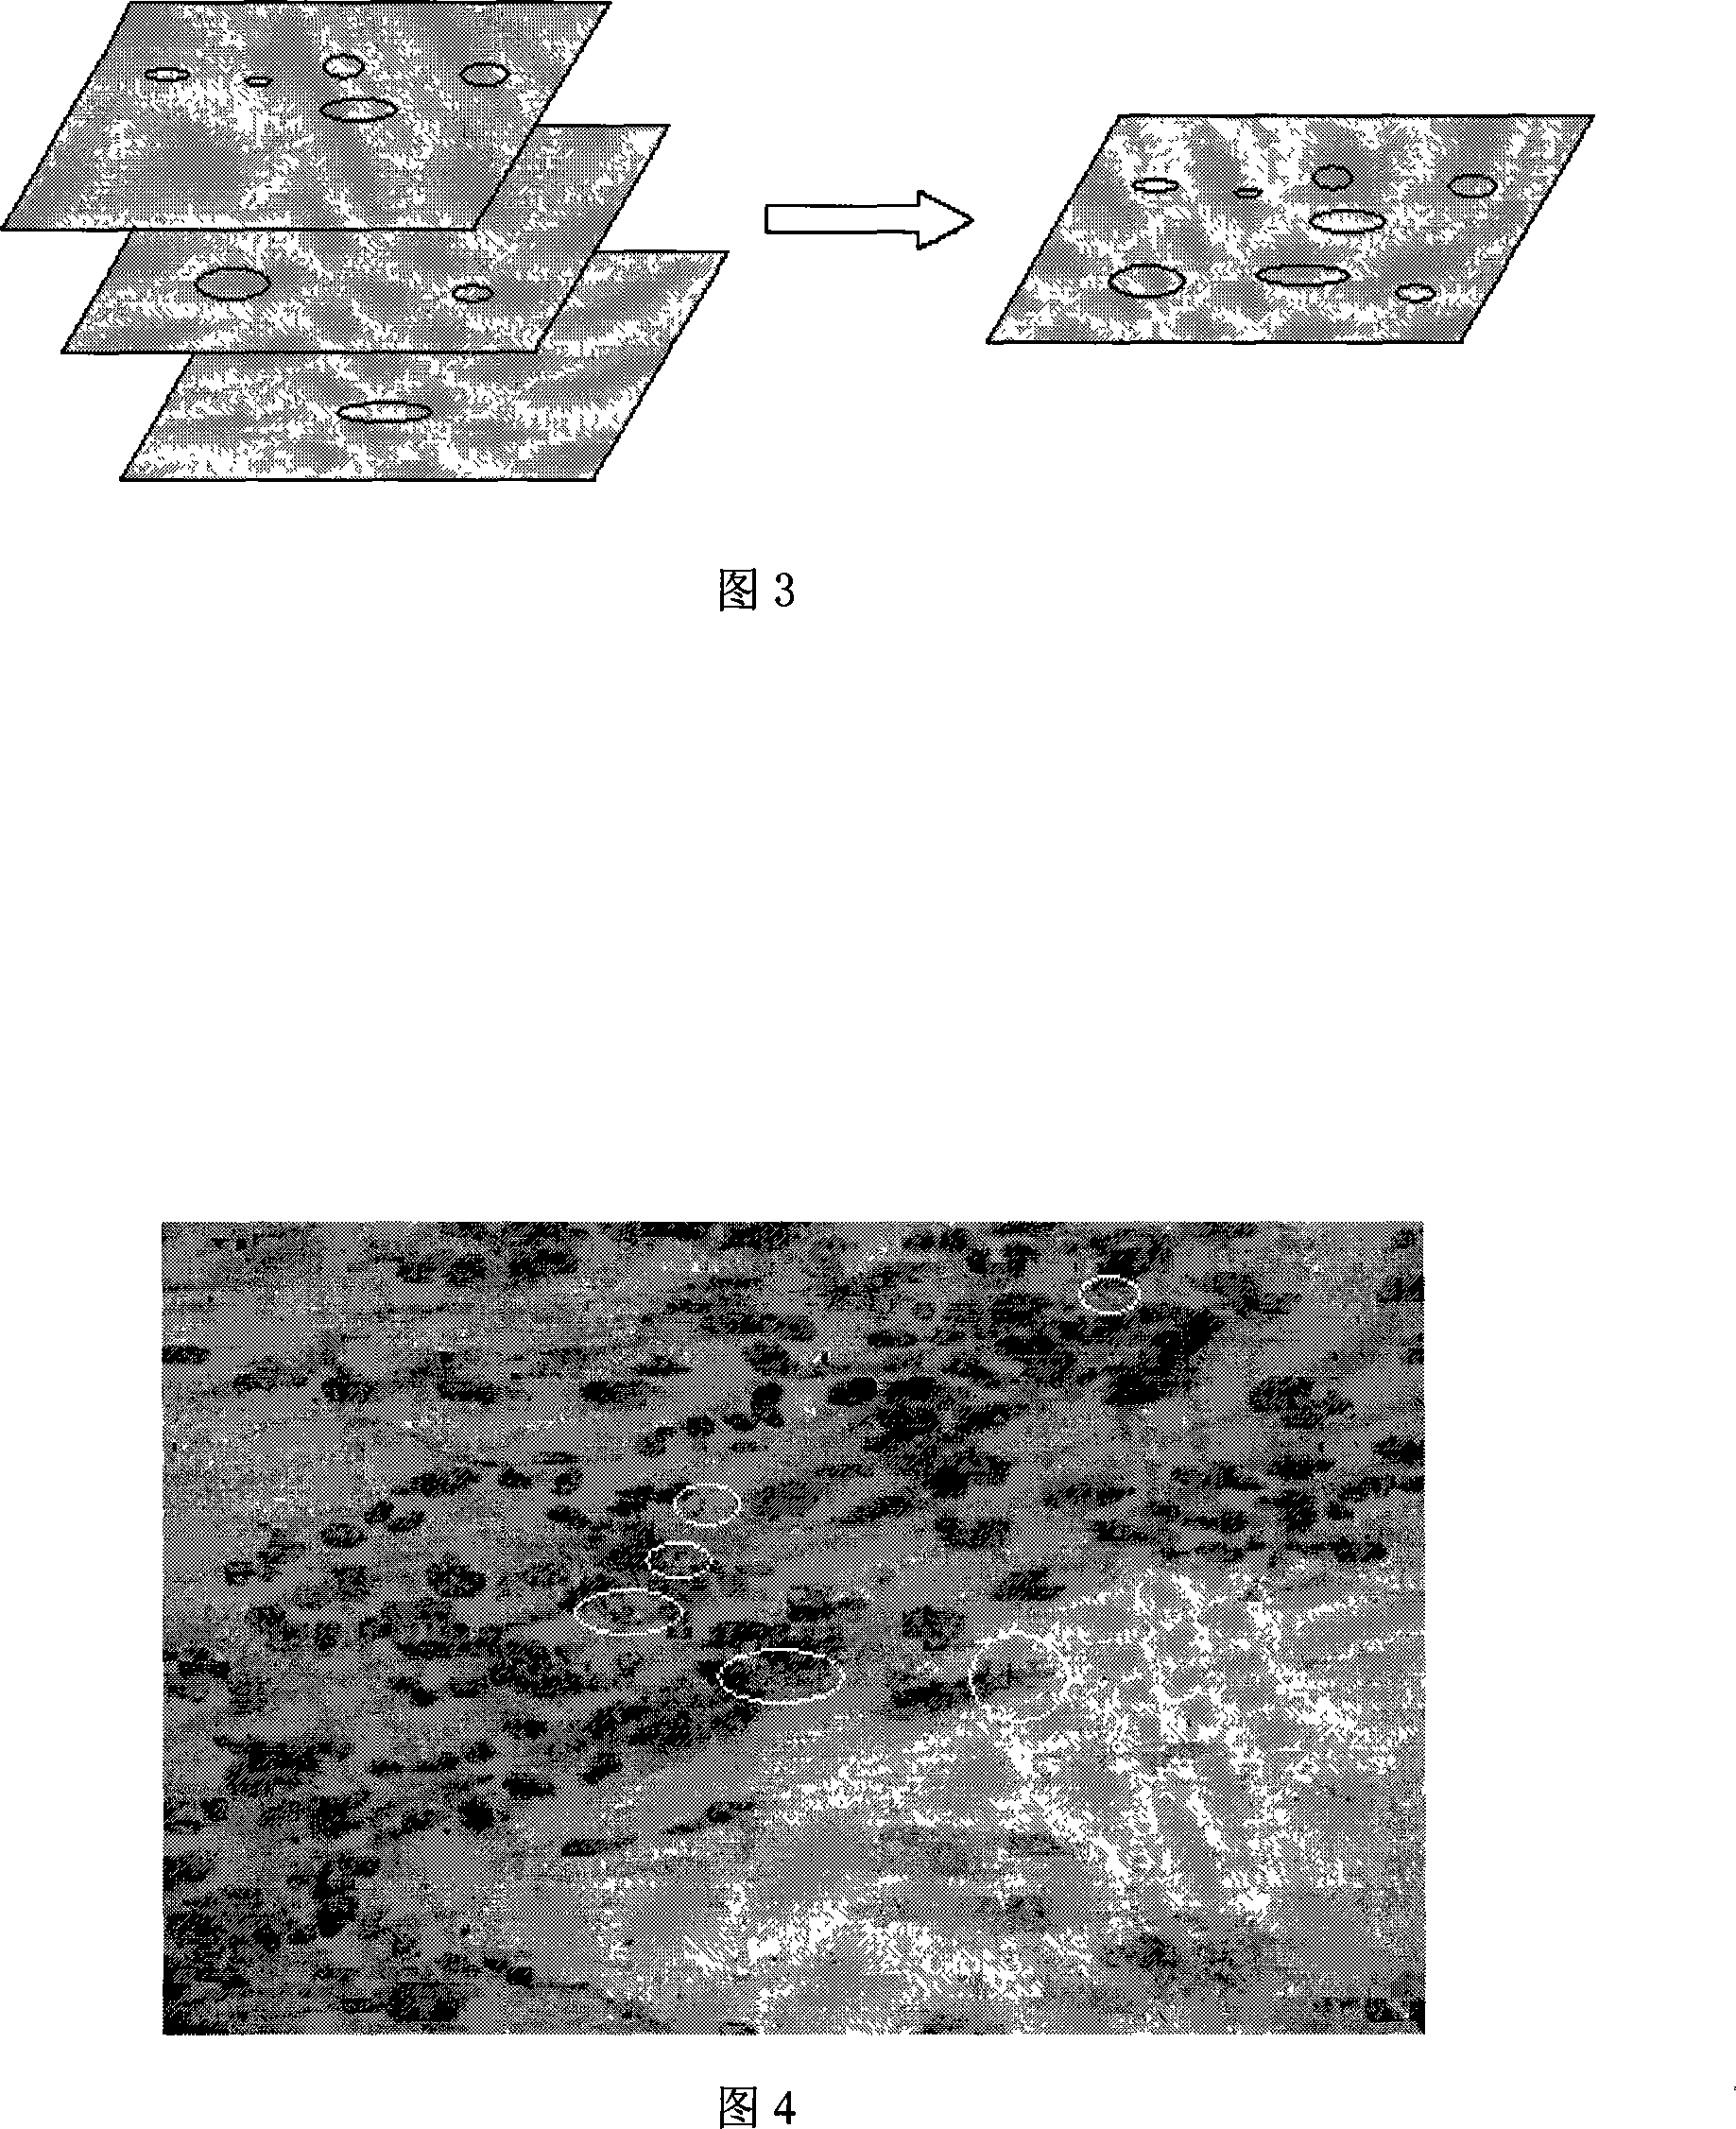 System and method for intelligent recognizing and counting sputum smear micro-image tubercle bacillus